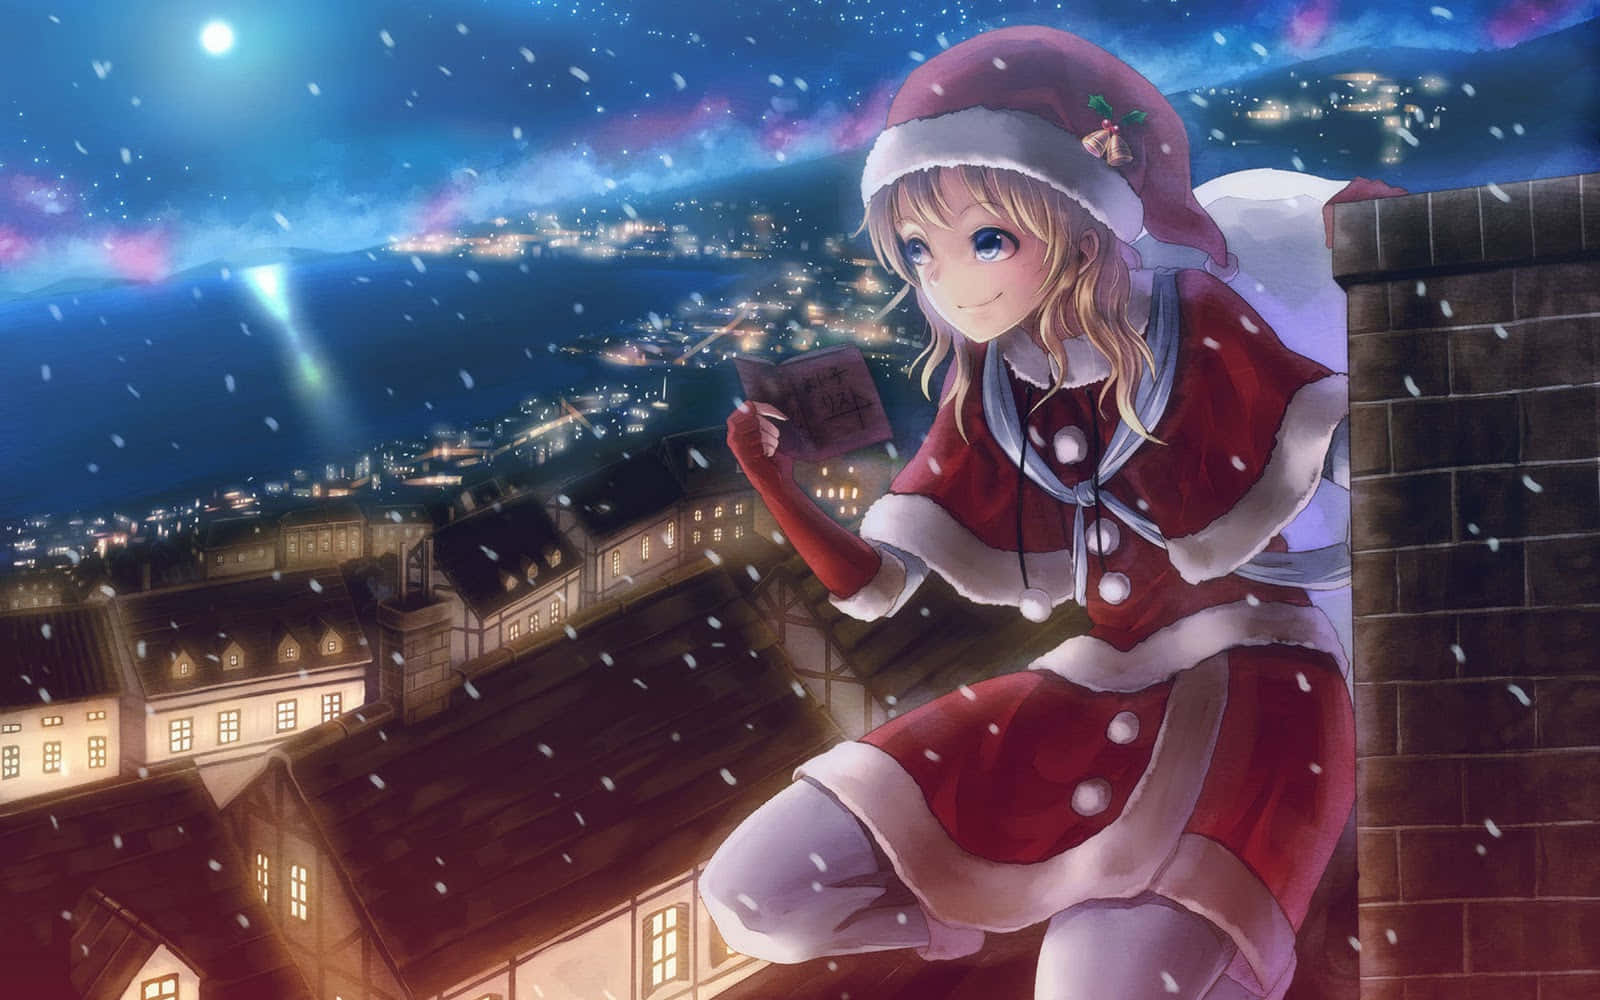 Download Get into a festive mood with this beautiful Anime Christmas  wallpaper! | Wallpapers.com